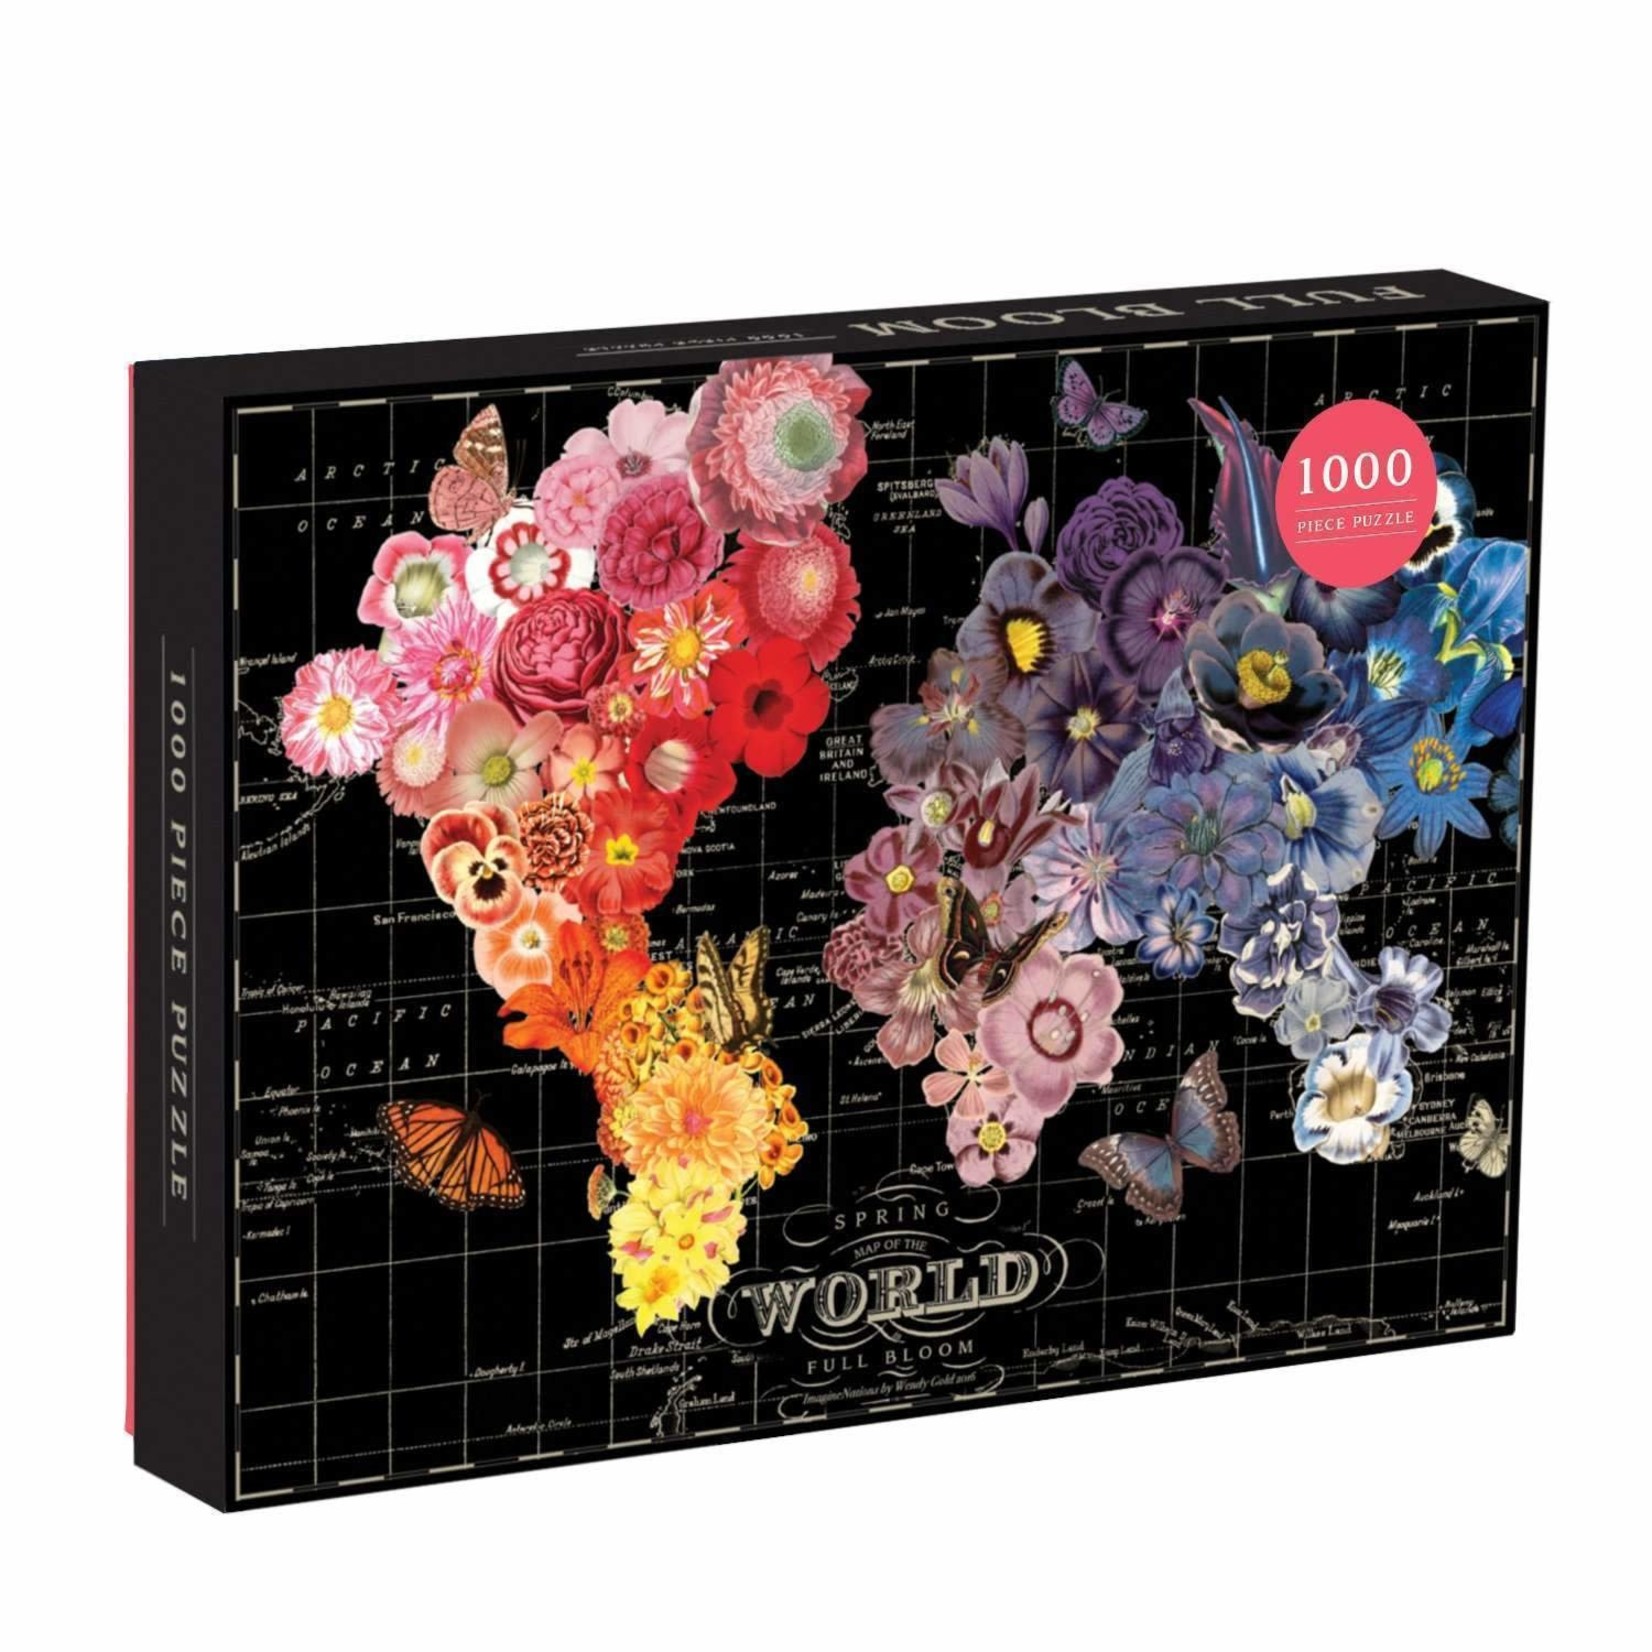 Galison Wendy Gold Full Bloom - 1000 Piece Jigsaw Puzzle